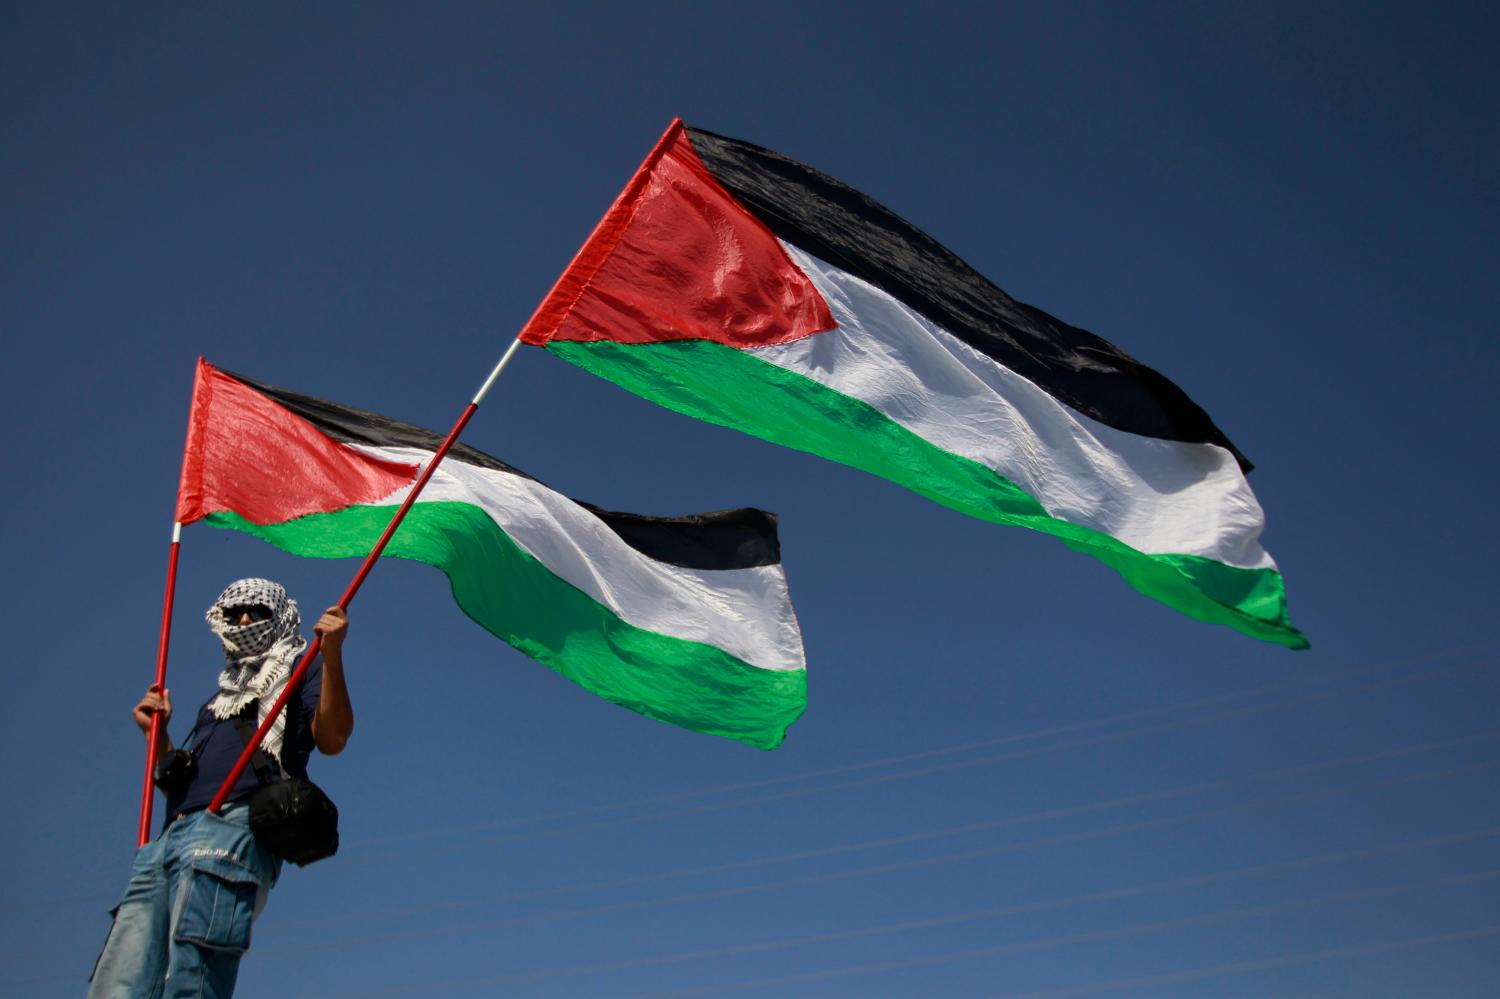 An Israeli Arab holds Palestinian flags during a demonstration calling for the right of return for refugees who fled the war which followed Israel's independence, on the anniversary of the creation of the state in the town of Abu Sinan, northern Israel, April 26, 2012. REUTERS/Ammar Awad (ISRAEL - Tags: POLITICS CIVIL UNREST)